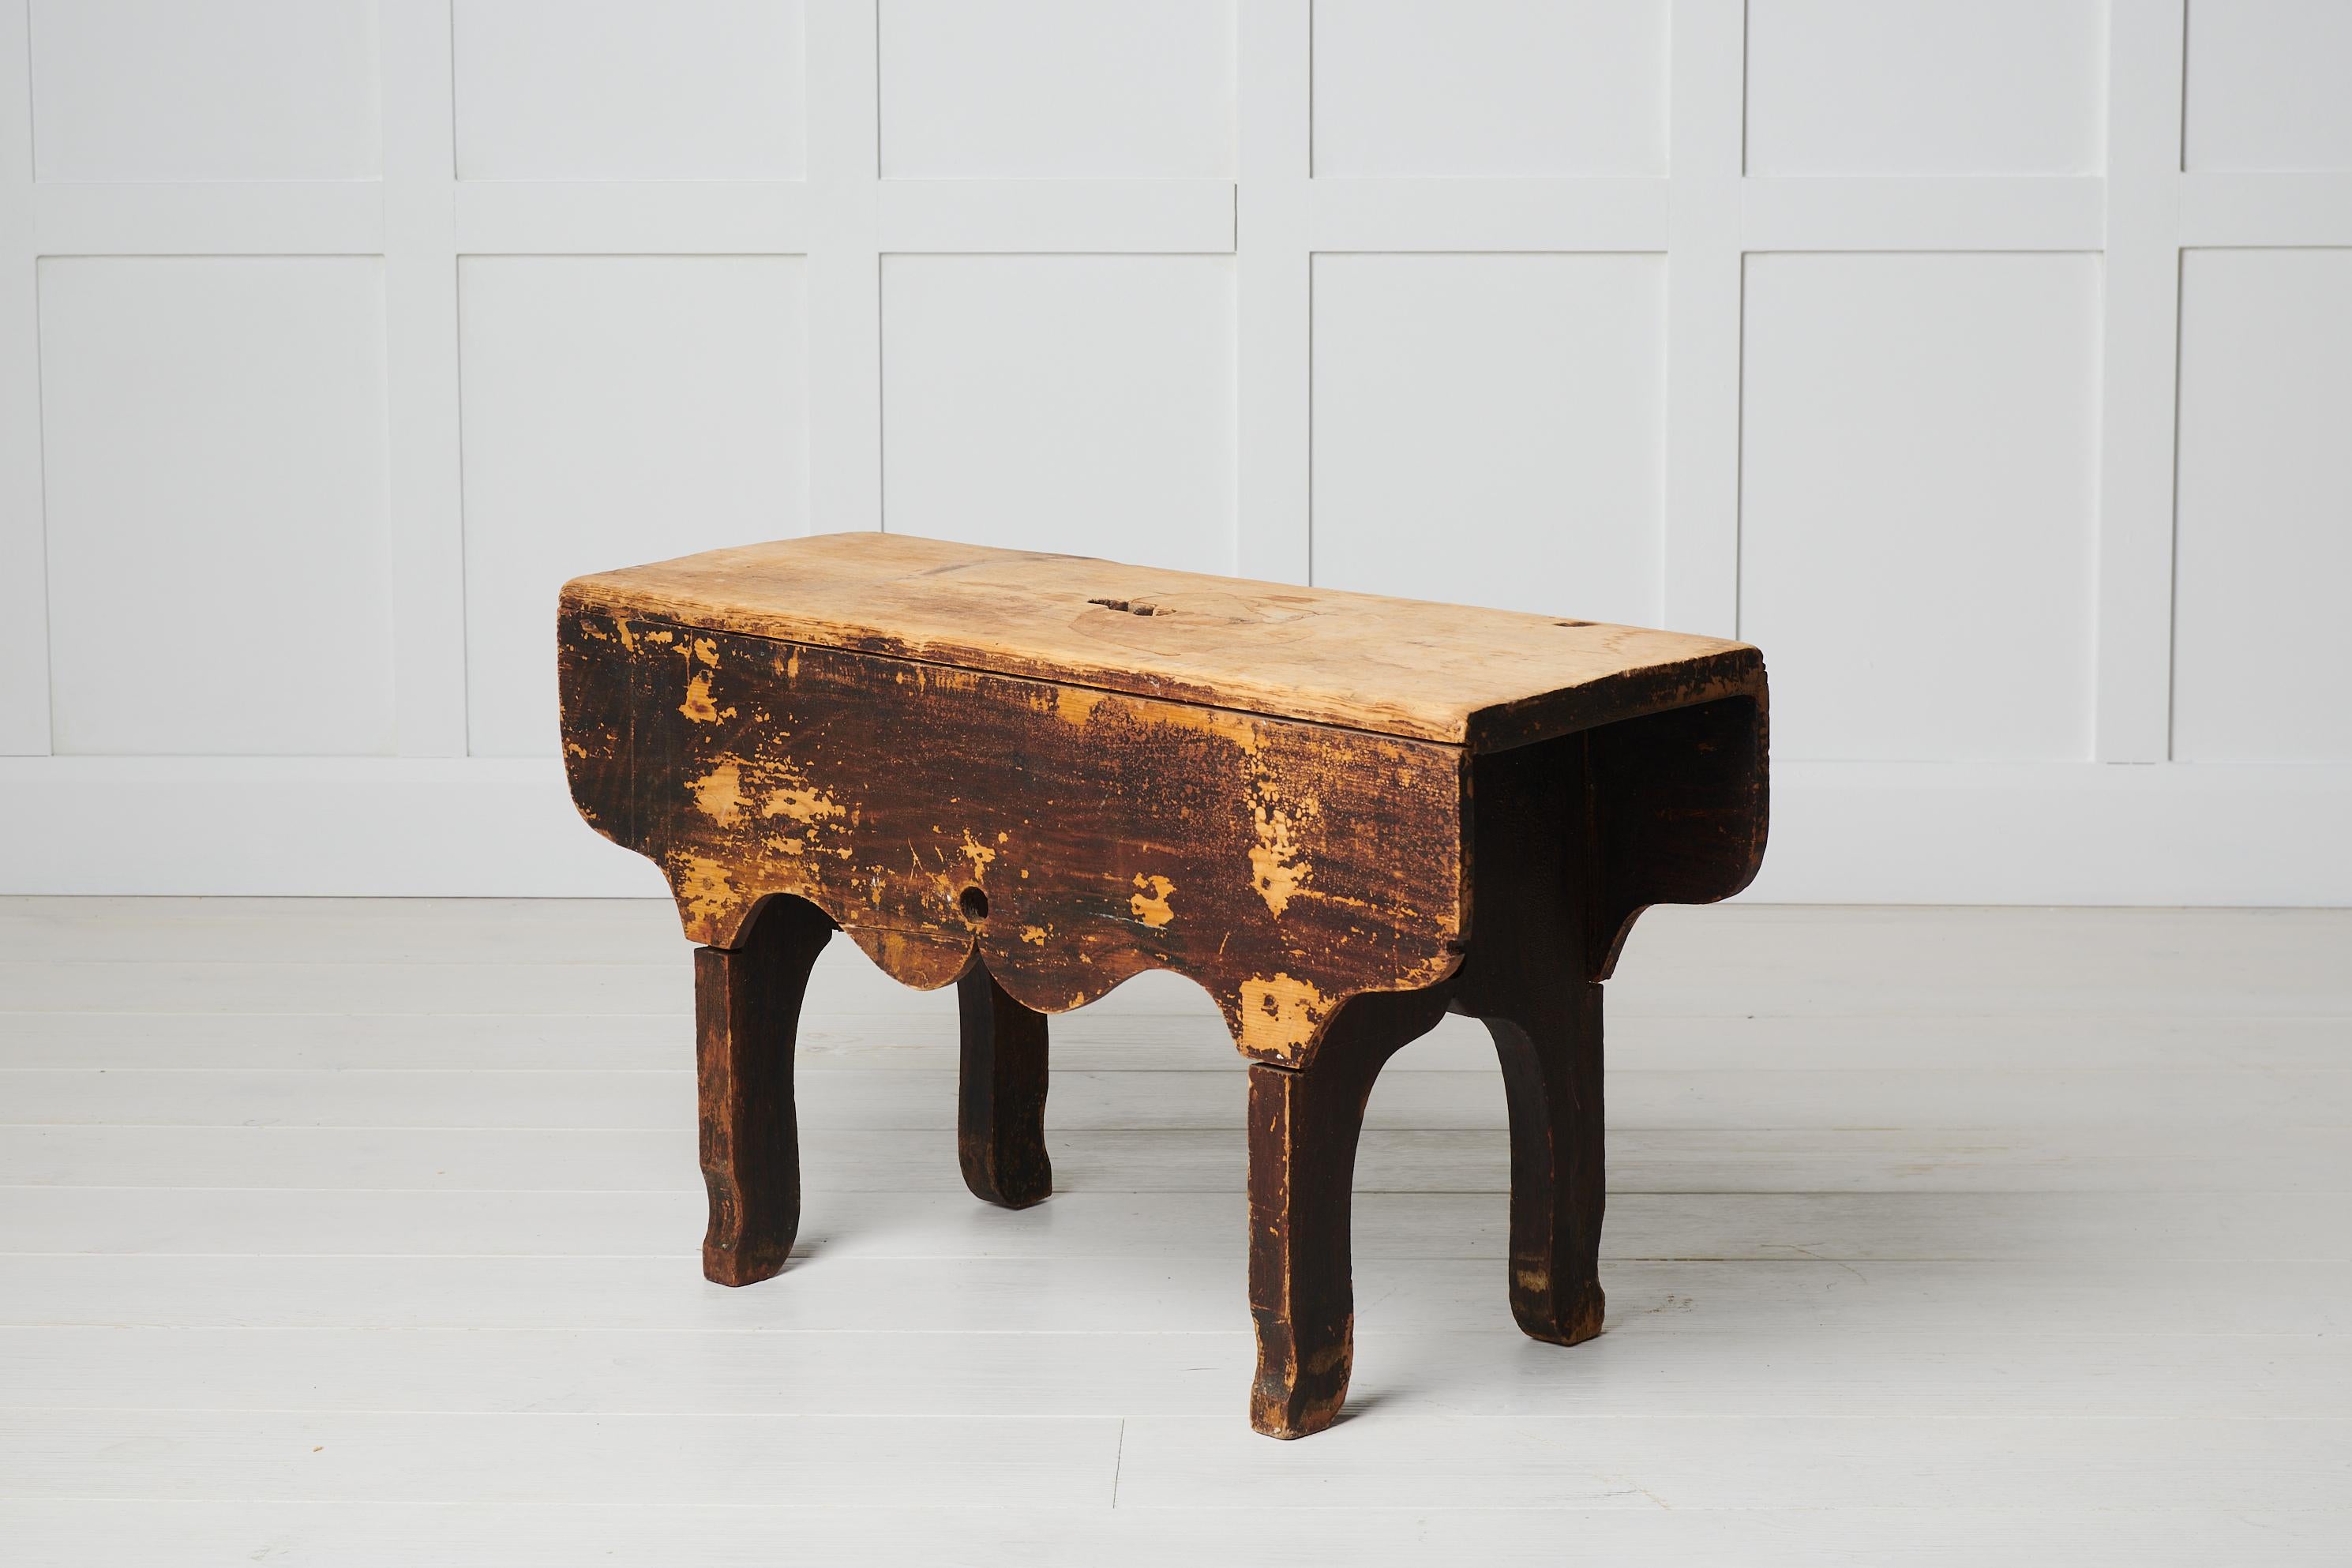 Charming antique Swedish stool in folk art from northern Sweden made around 1880. The stool is made in painted pine with the original faux paint that imitates mahogany. It’s the original paint which has become genuinely distressed with time and use.